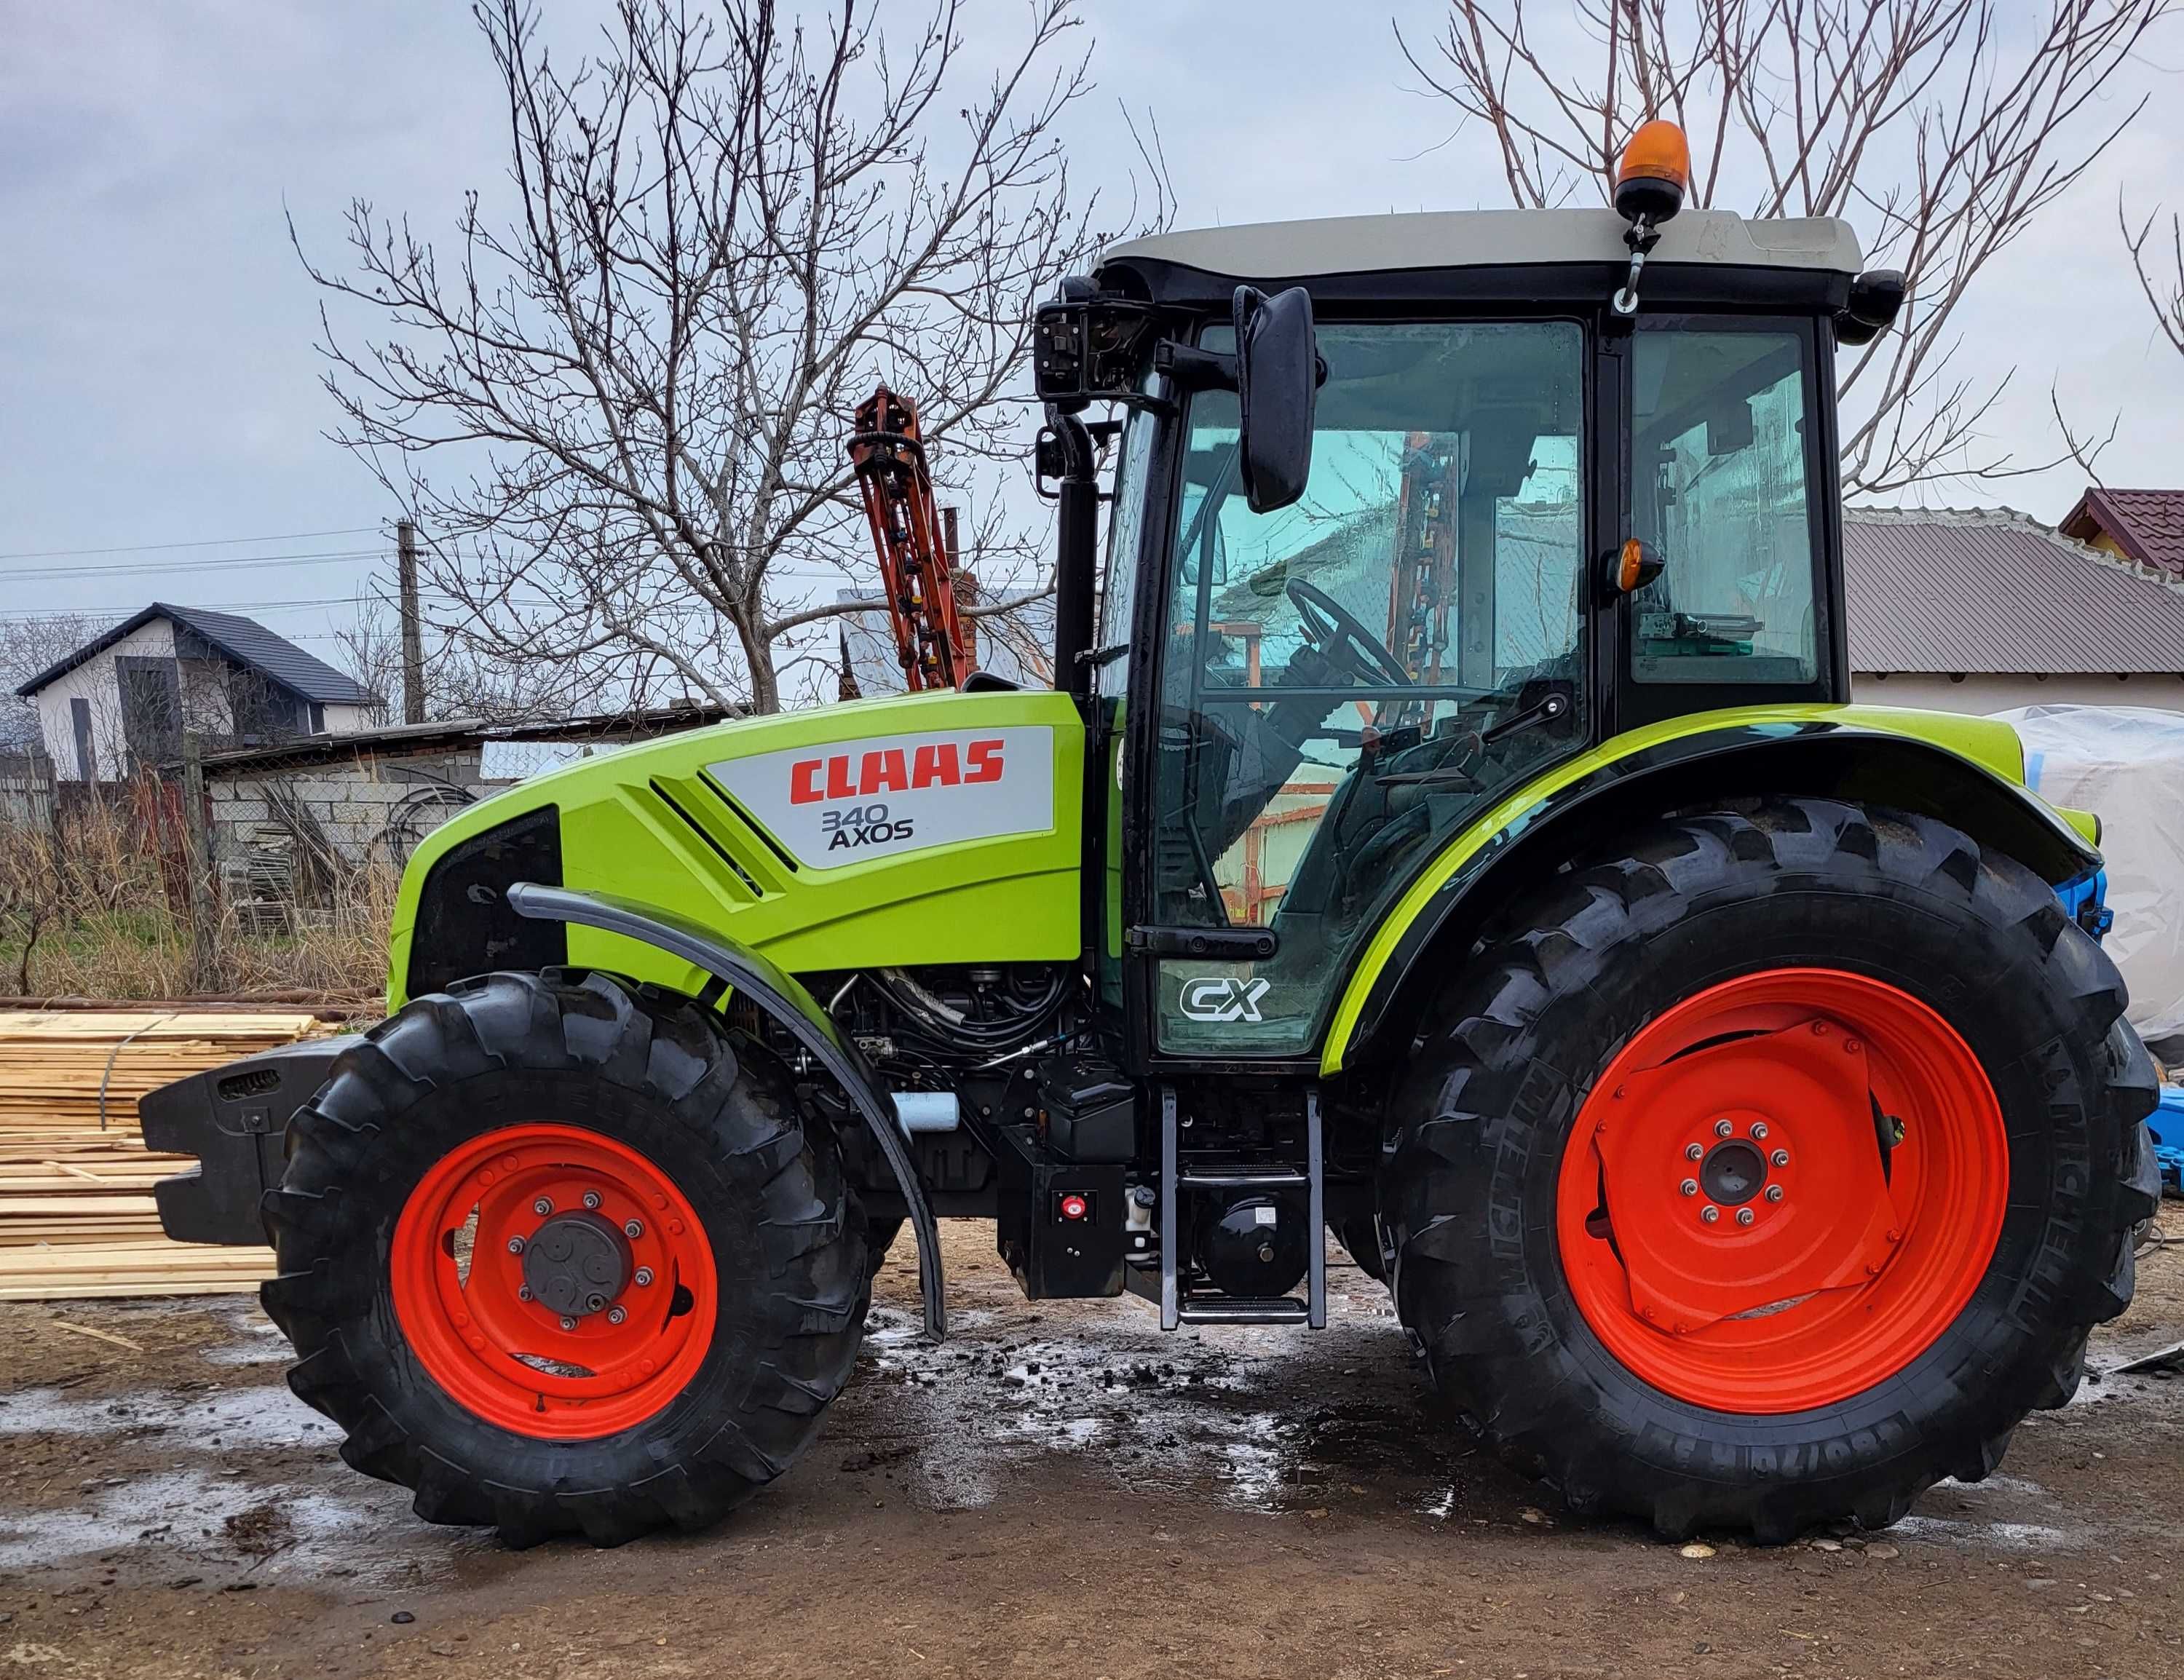 Tractor claas 340 axos si tractor fiat 60-66